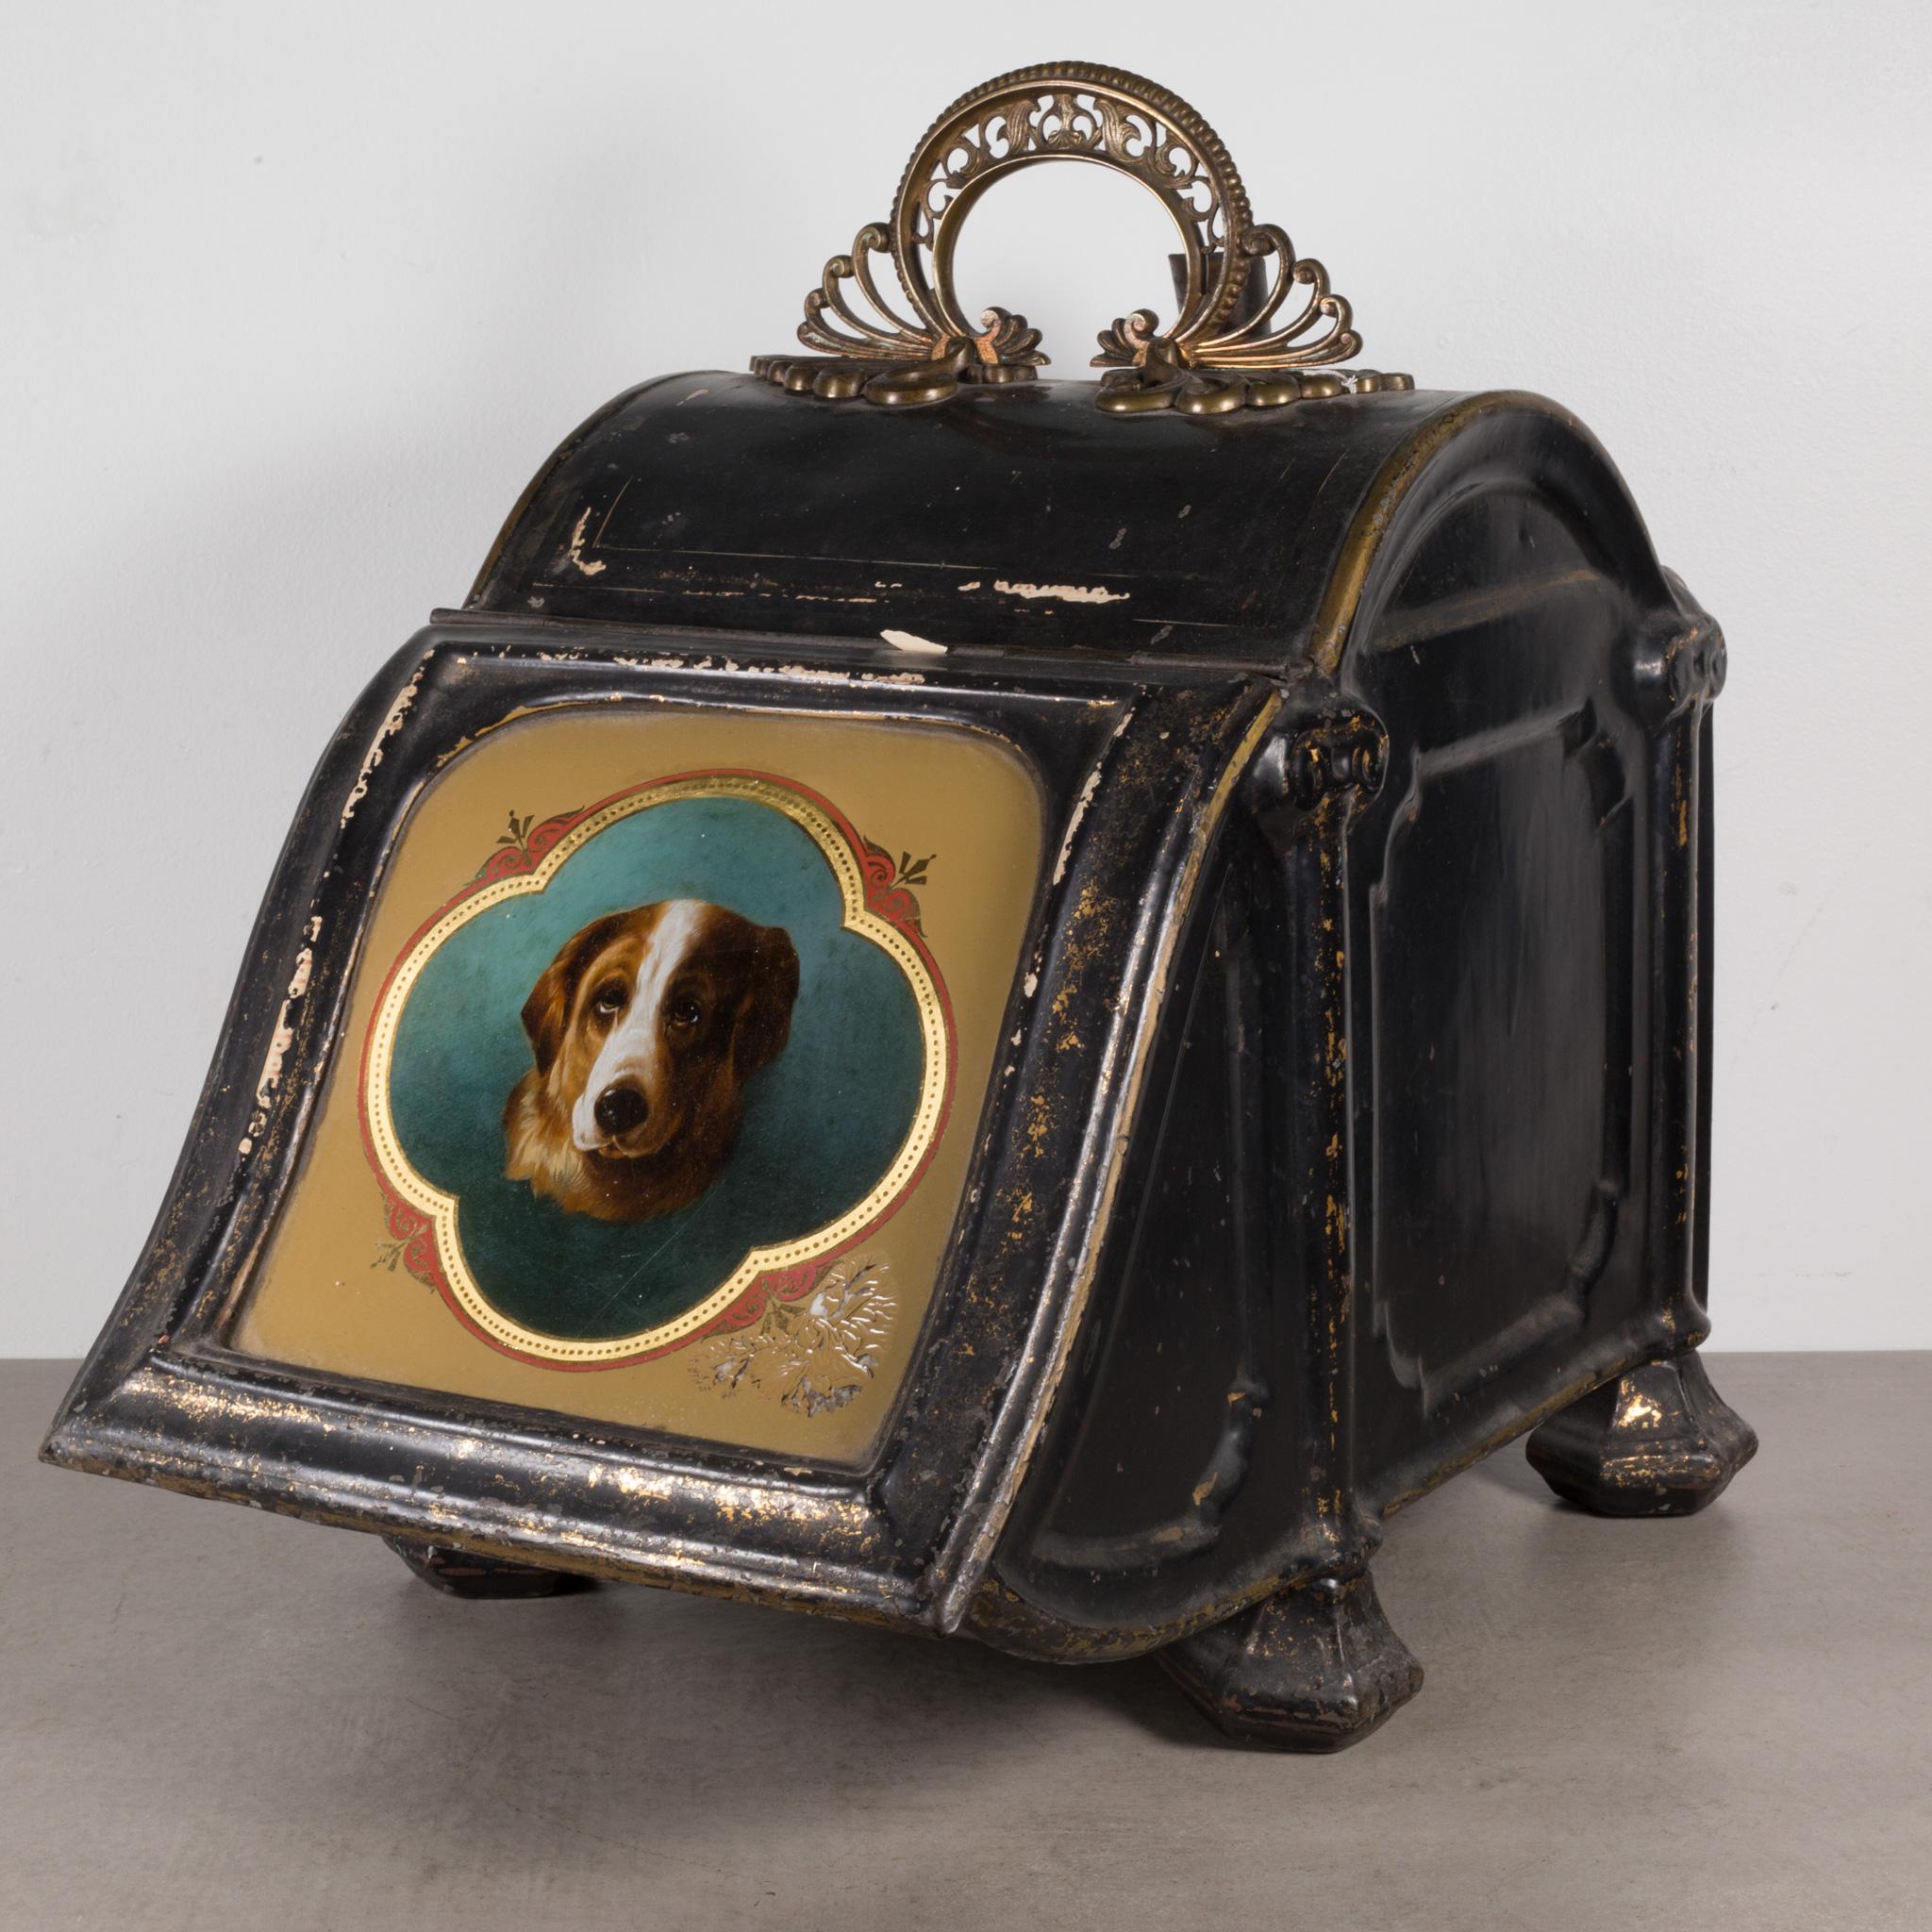 ABOUT

Mid 19th century British coal scuttle or coal hod with ornate handle, portrait of a dog, and hand scoop. Brass handle and painted brass metal body.

 CREATOR Unknown.
 DATE OF MANUFACTURE c.1860.
 MATERIALS AND TECHNIQUES Metal, Brass.